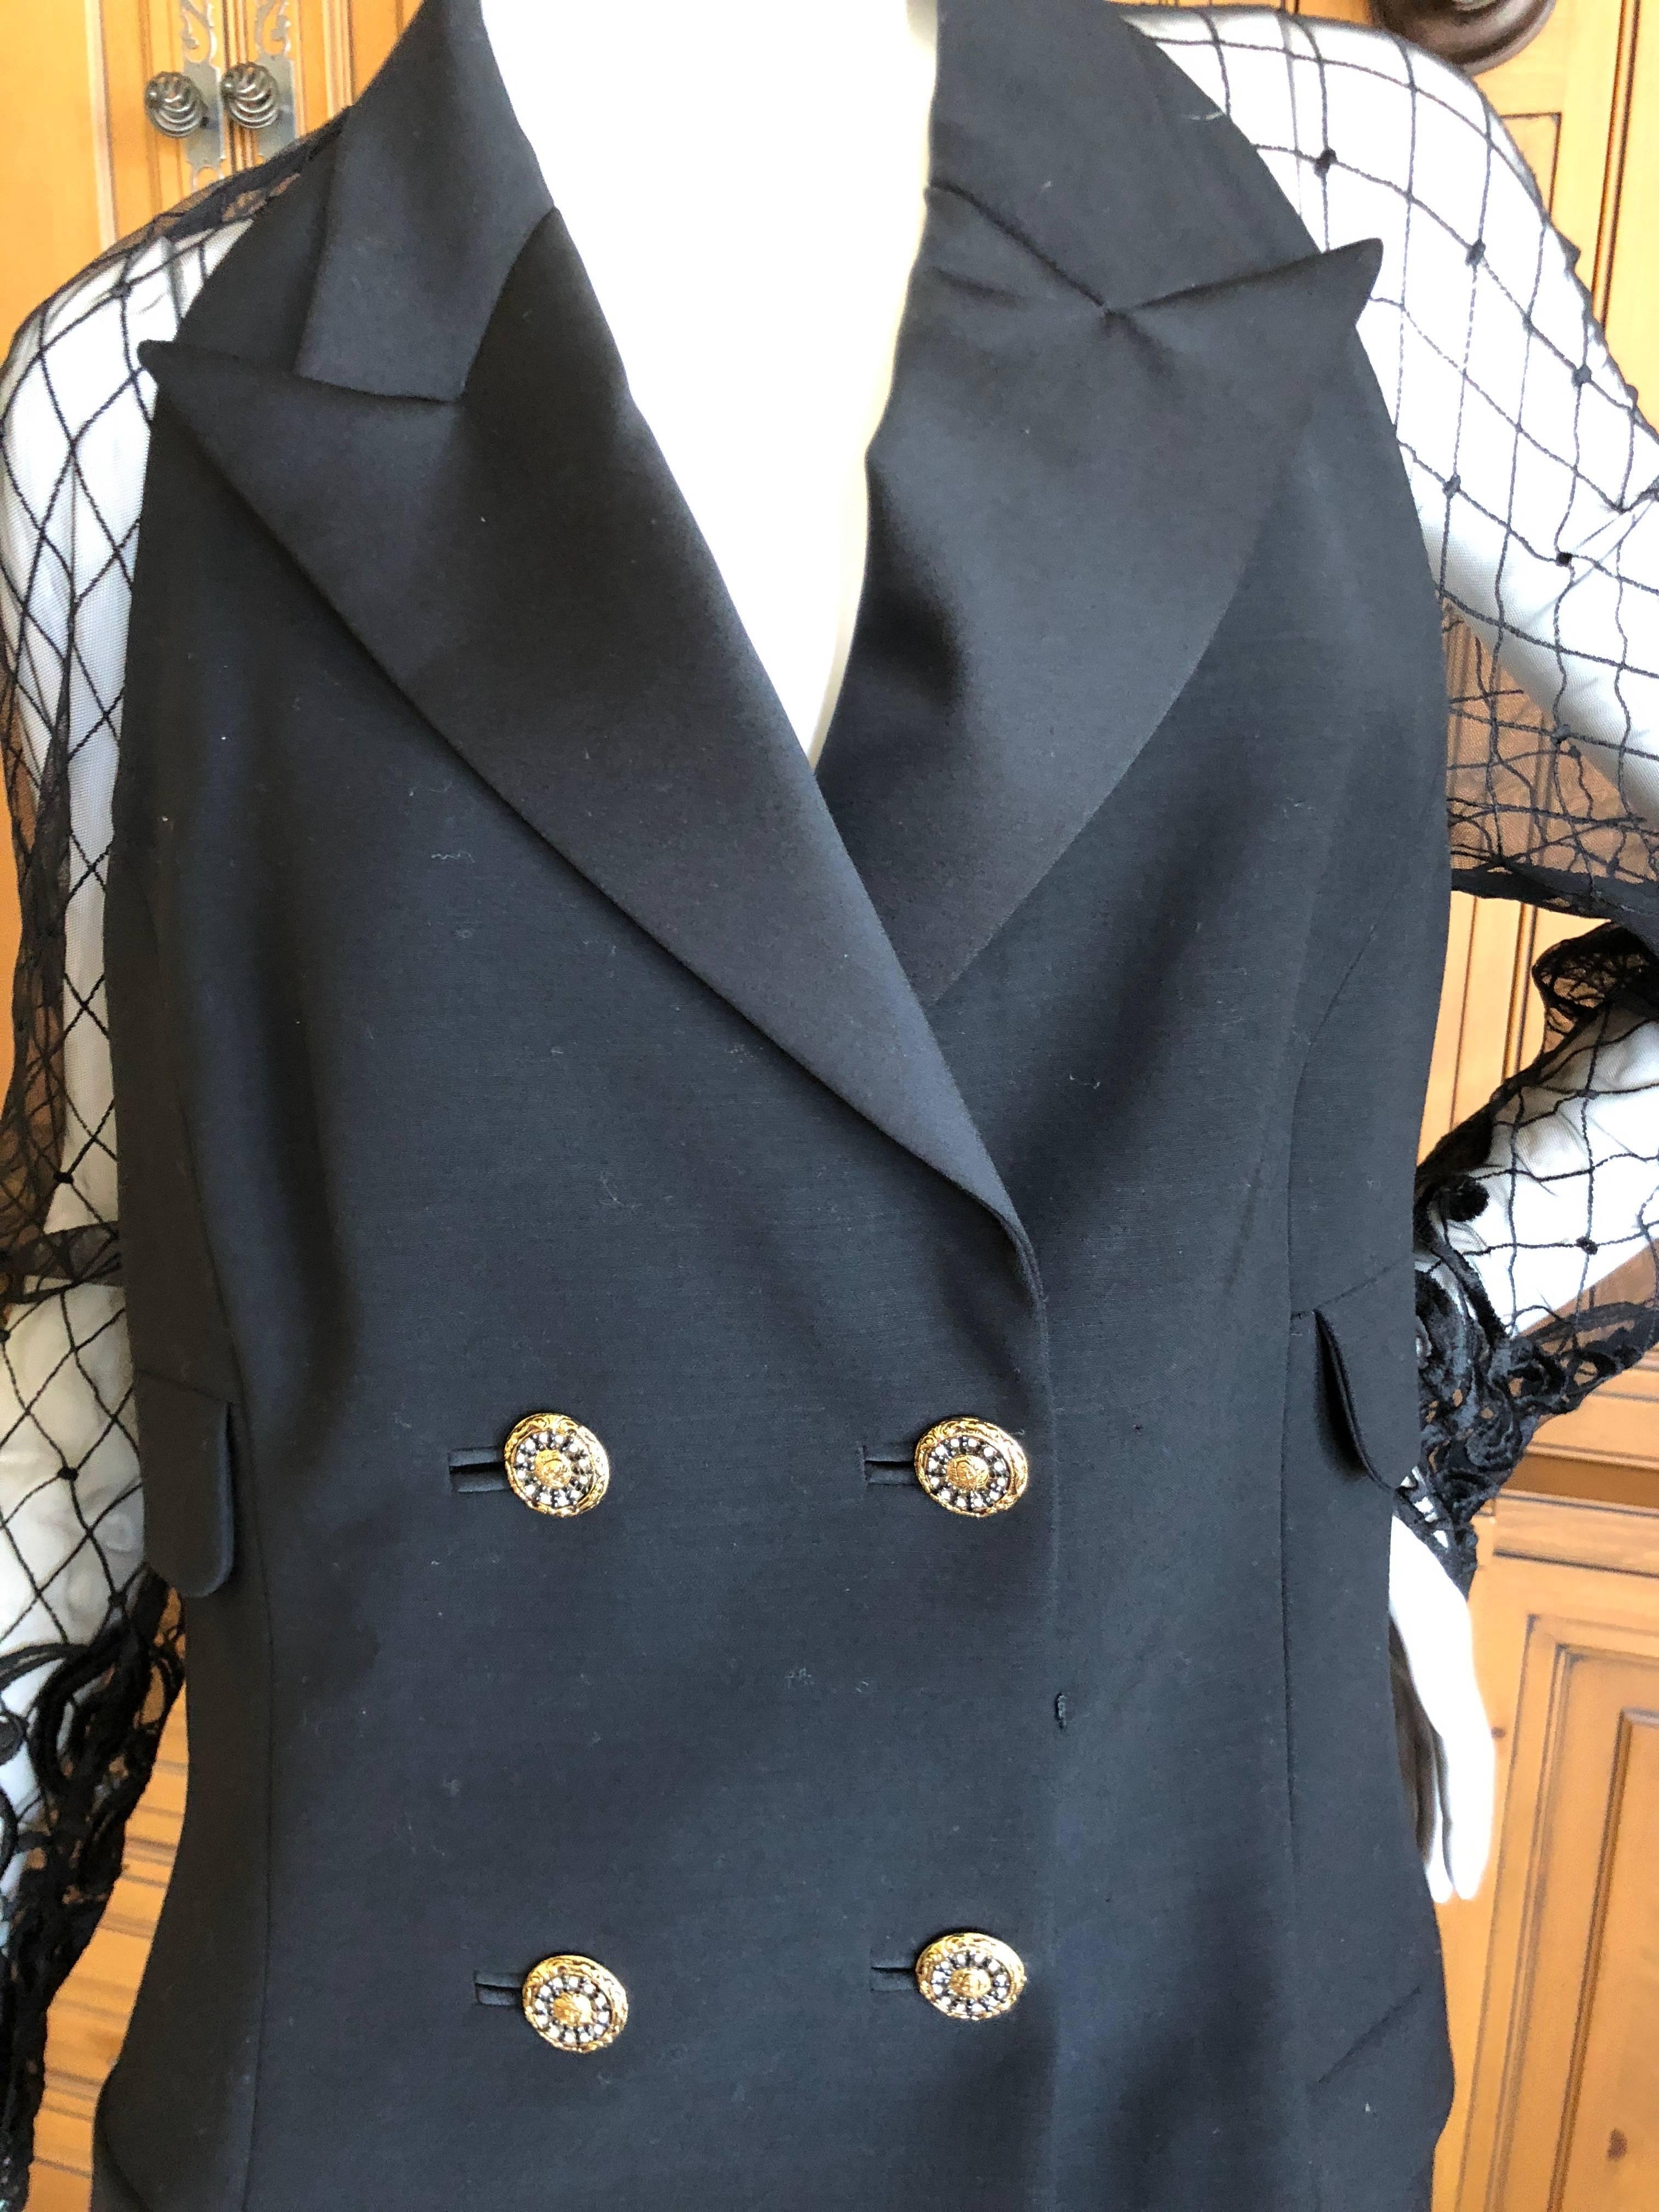 Women's Gianni Versace Couture S 1994 Black Tux Jacket Sheer Baroque Lace Back & Sleeves For Sale